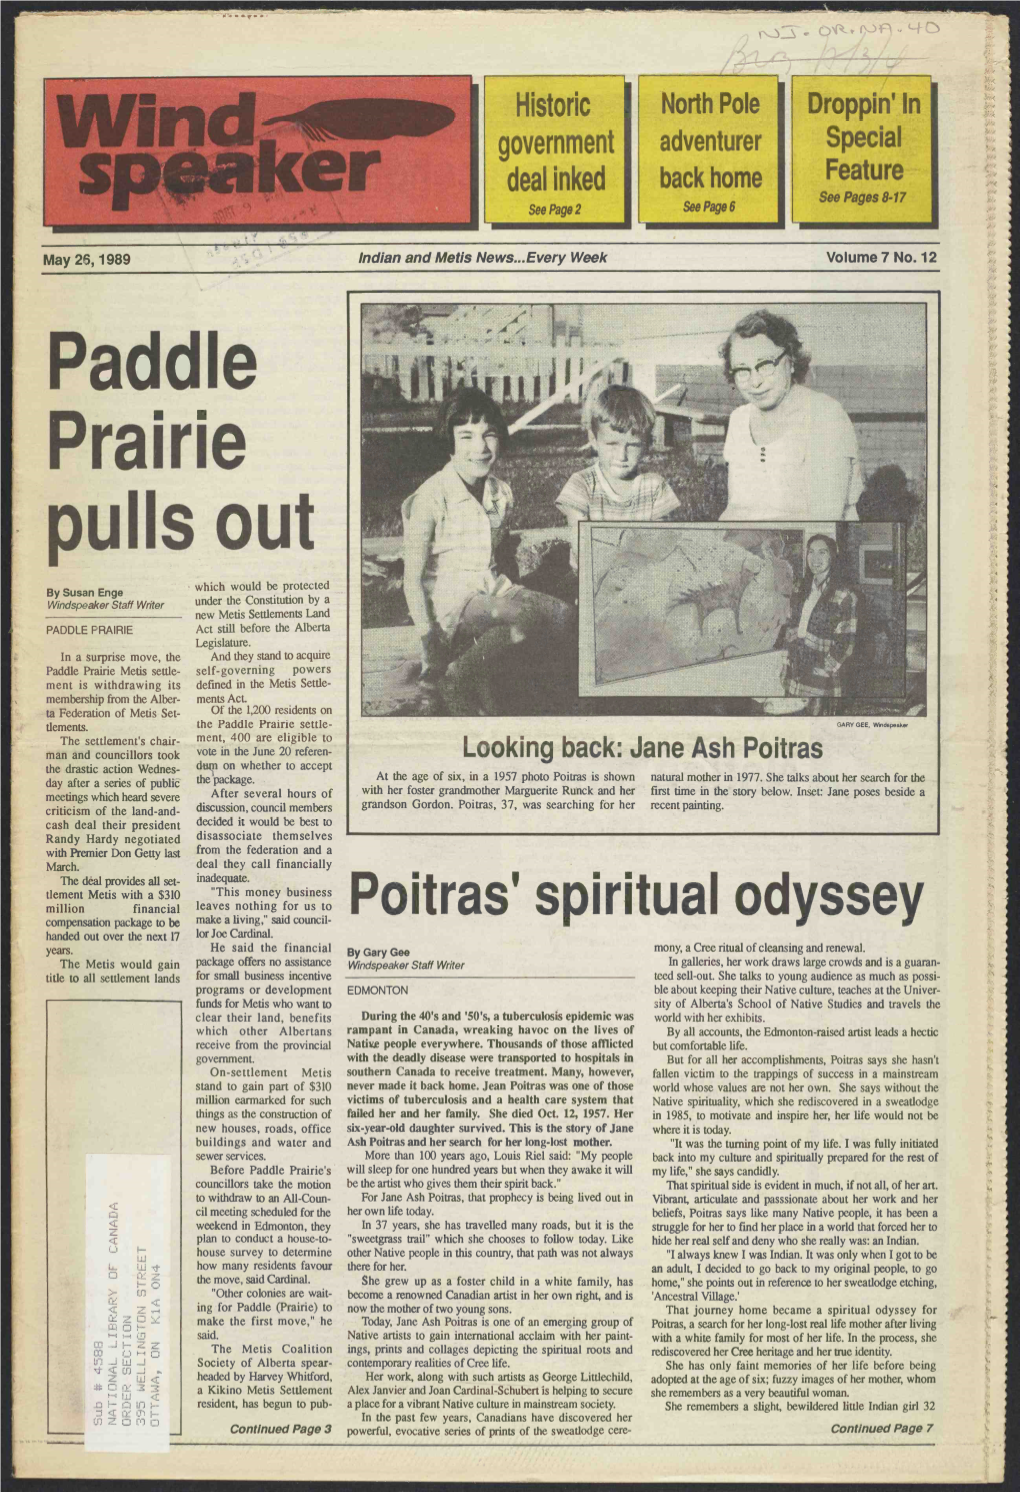 Poitras' Spiritual Odyssey Compensation Package to Be Make a Living," Said Council- Handed out Over the Next 17 Lor Joe Cardinal